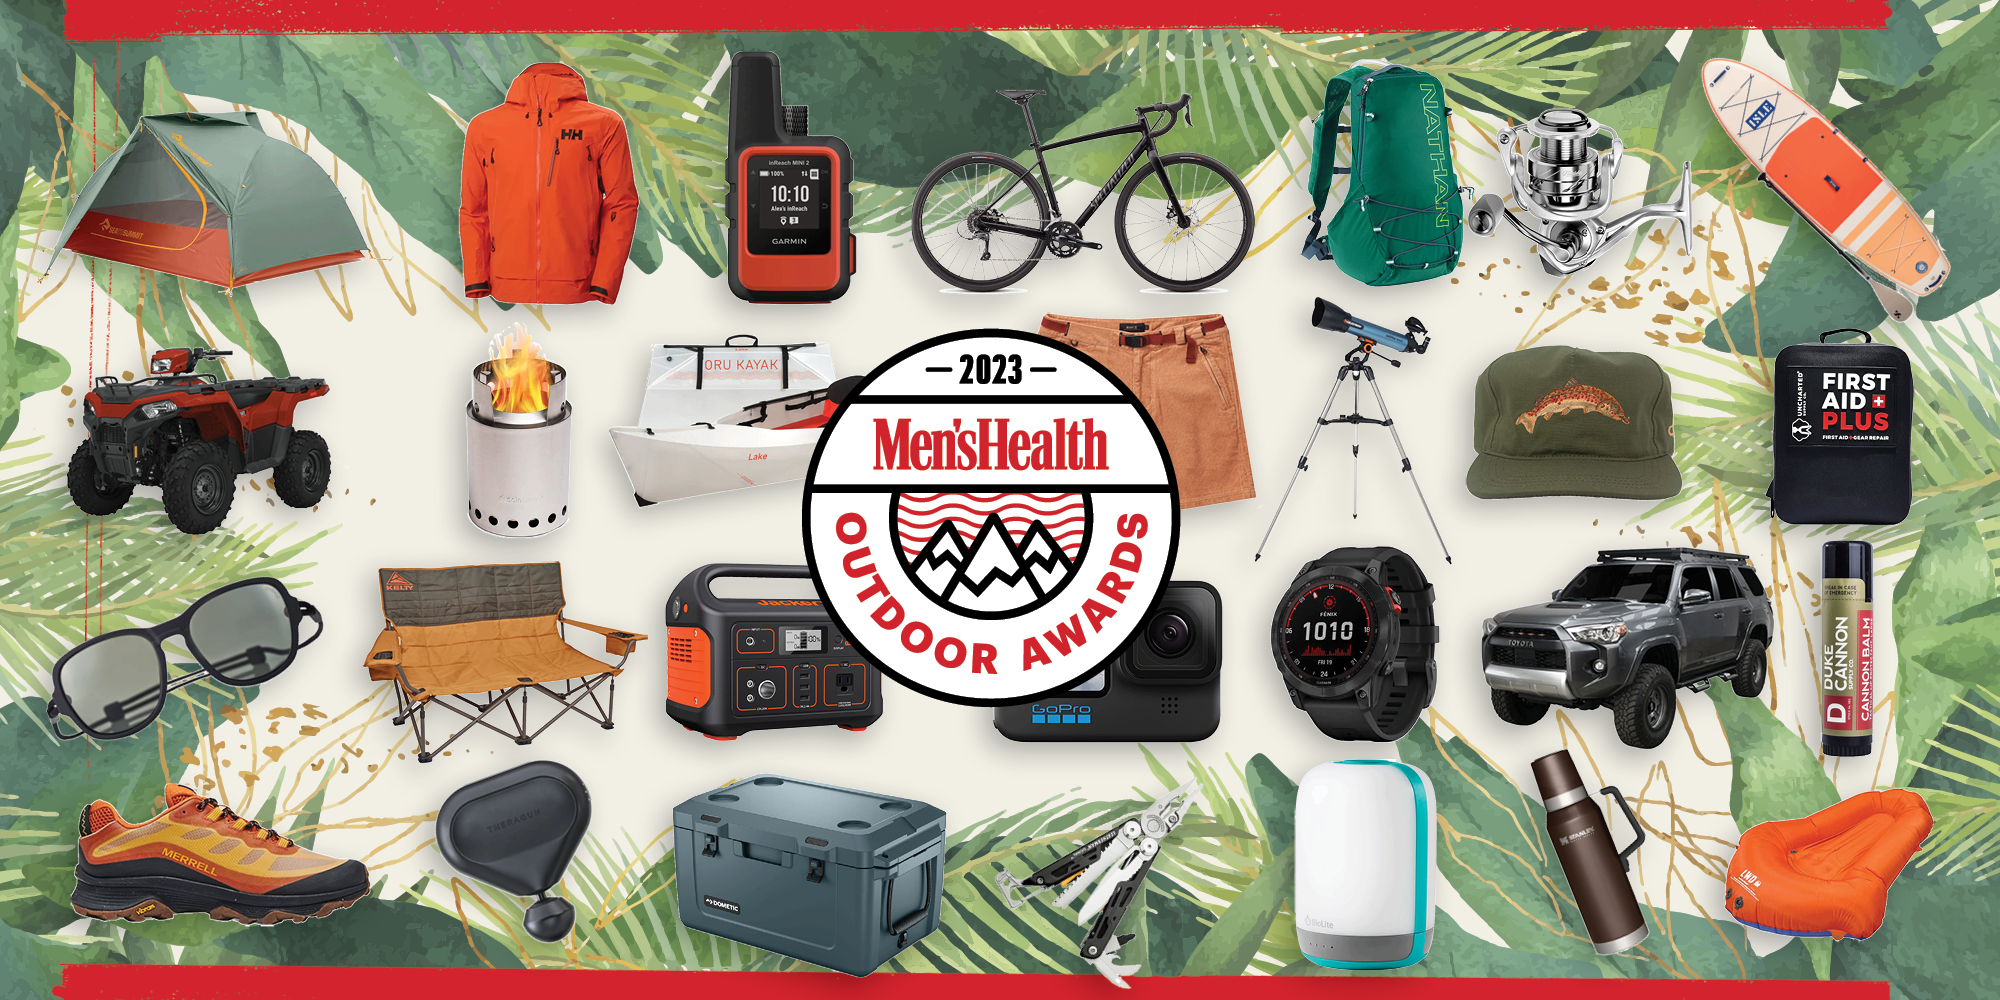 Best Camping and Outdoor Gear - Camping, Hiking, Ski Equipment